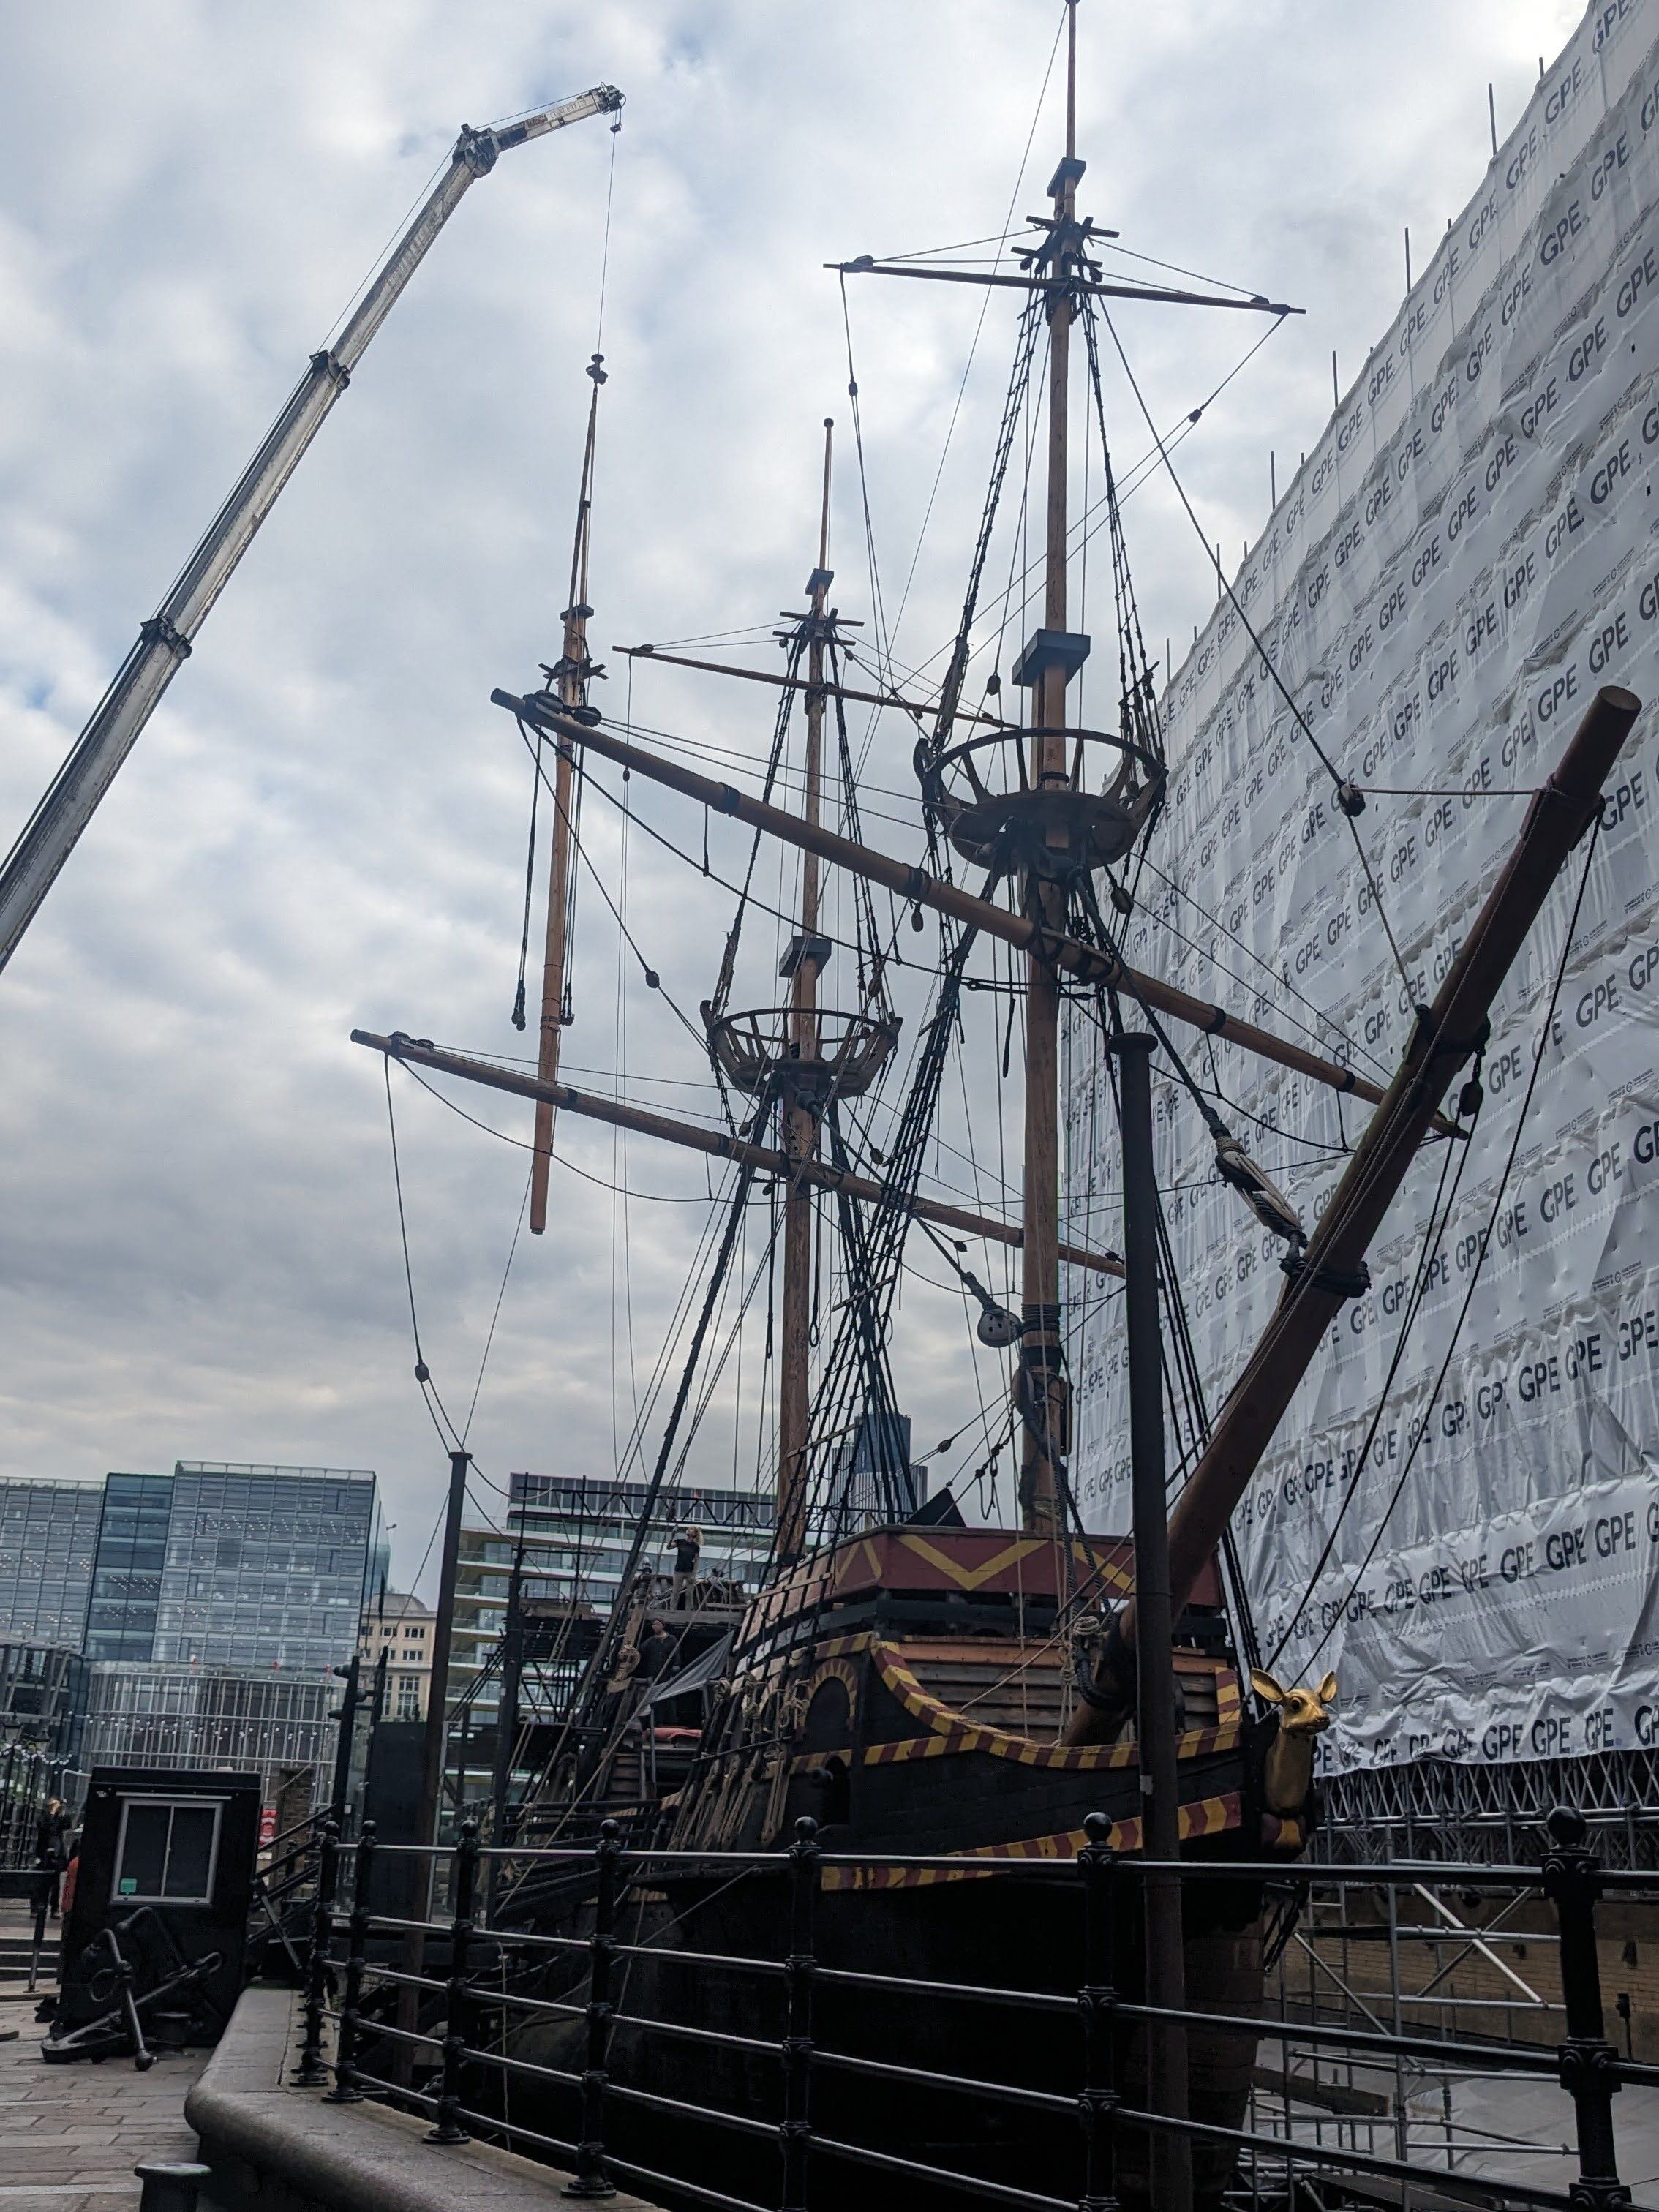 LAST OF THE MASTS SAILS SAFELY ONTO THE GOLDEN HINDE